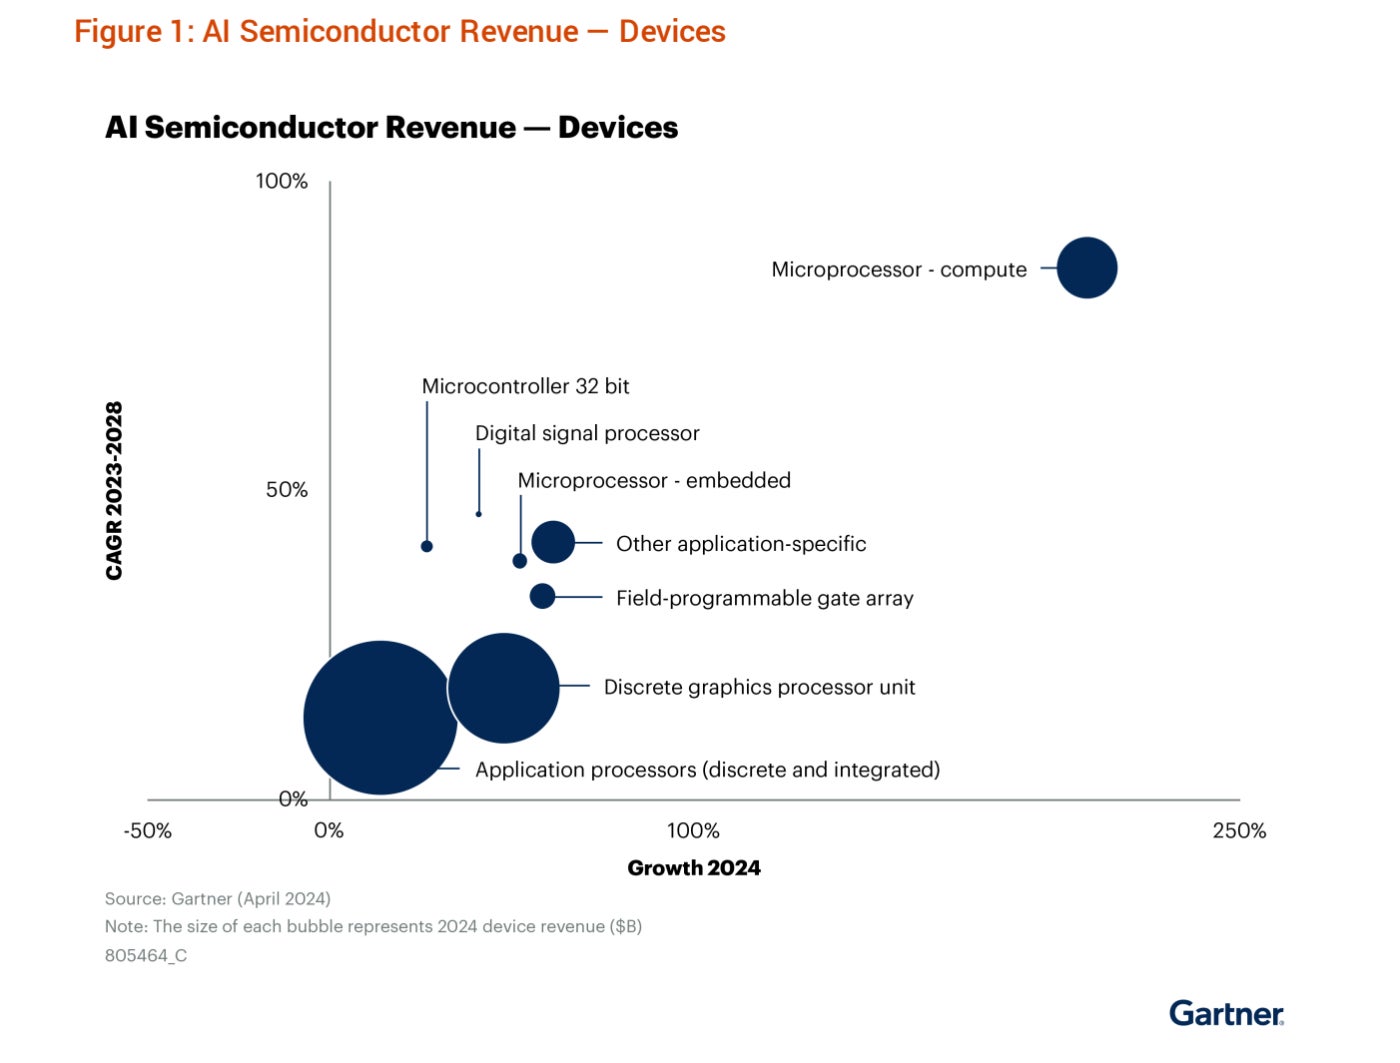 Discrete and integrated application processors saw the most growth in AI semiconductor revenue from devices in 2024.